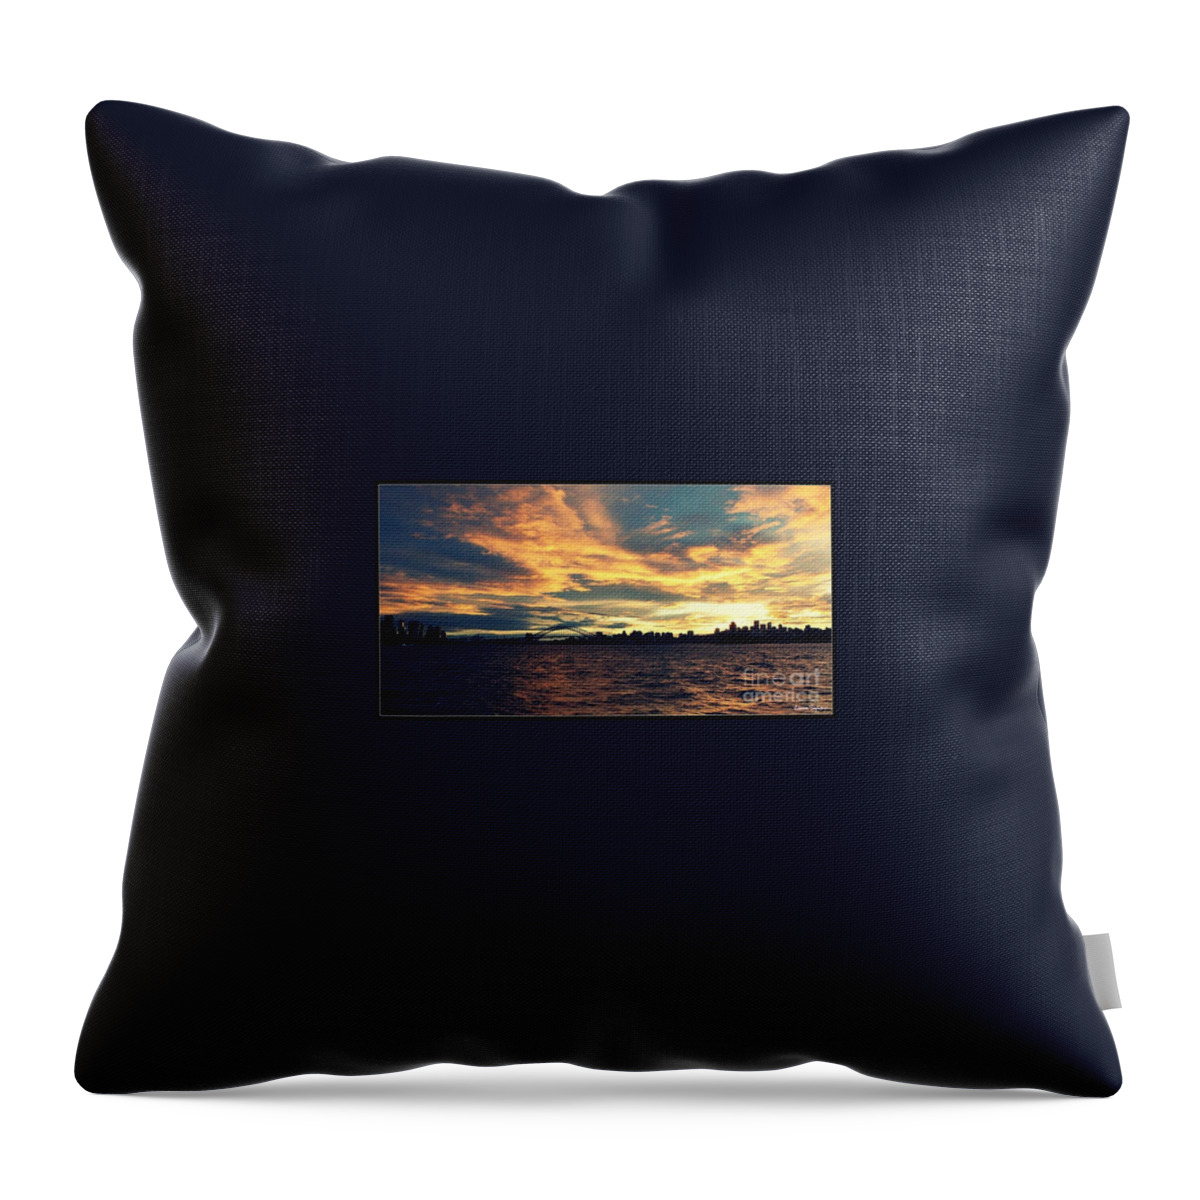 Sydney Throw Pillow featuring the mixed media Sydney Harbour At Sunset by Leanne Seymour